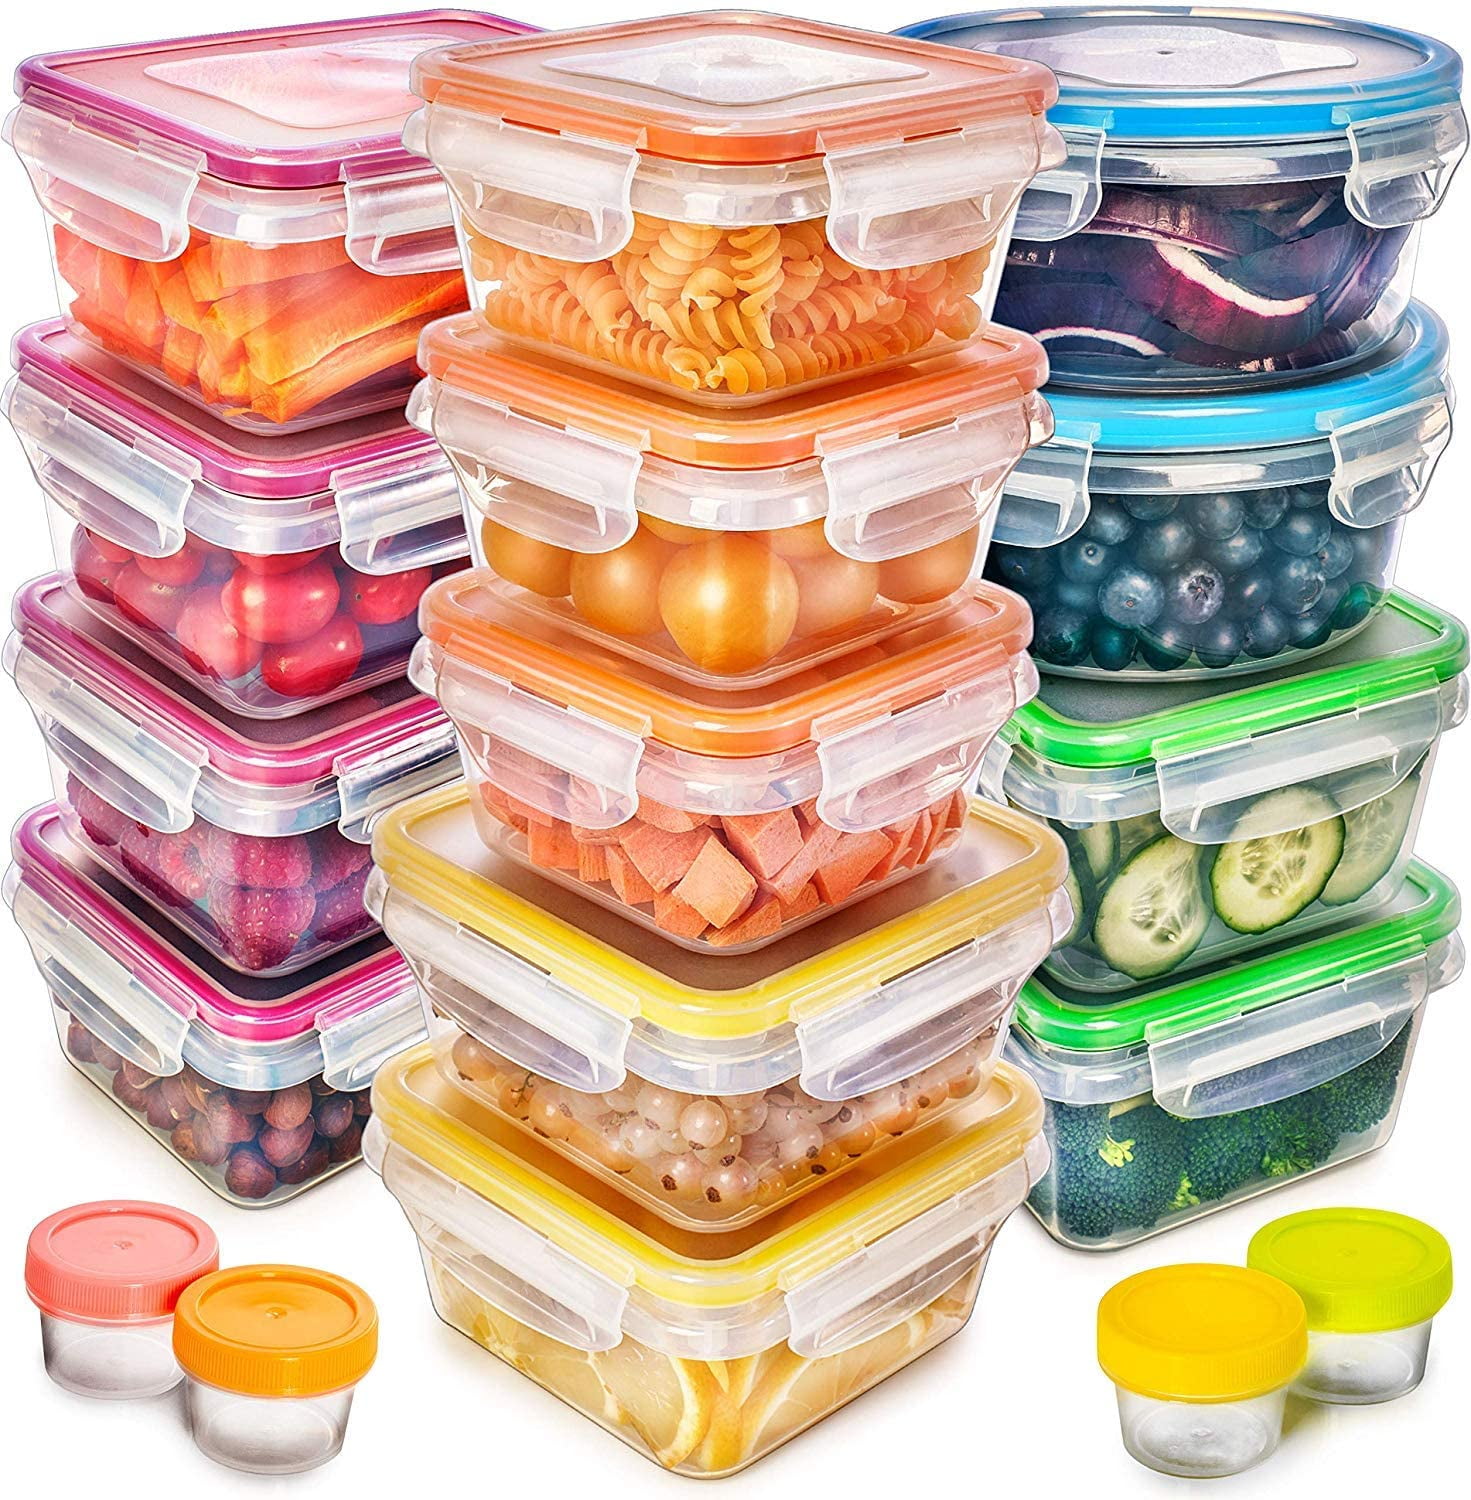 Hygienic Food Storage Container Leakproof Durable Clip Lock Lid Stylish LunchBox 